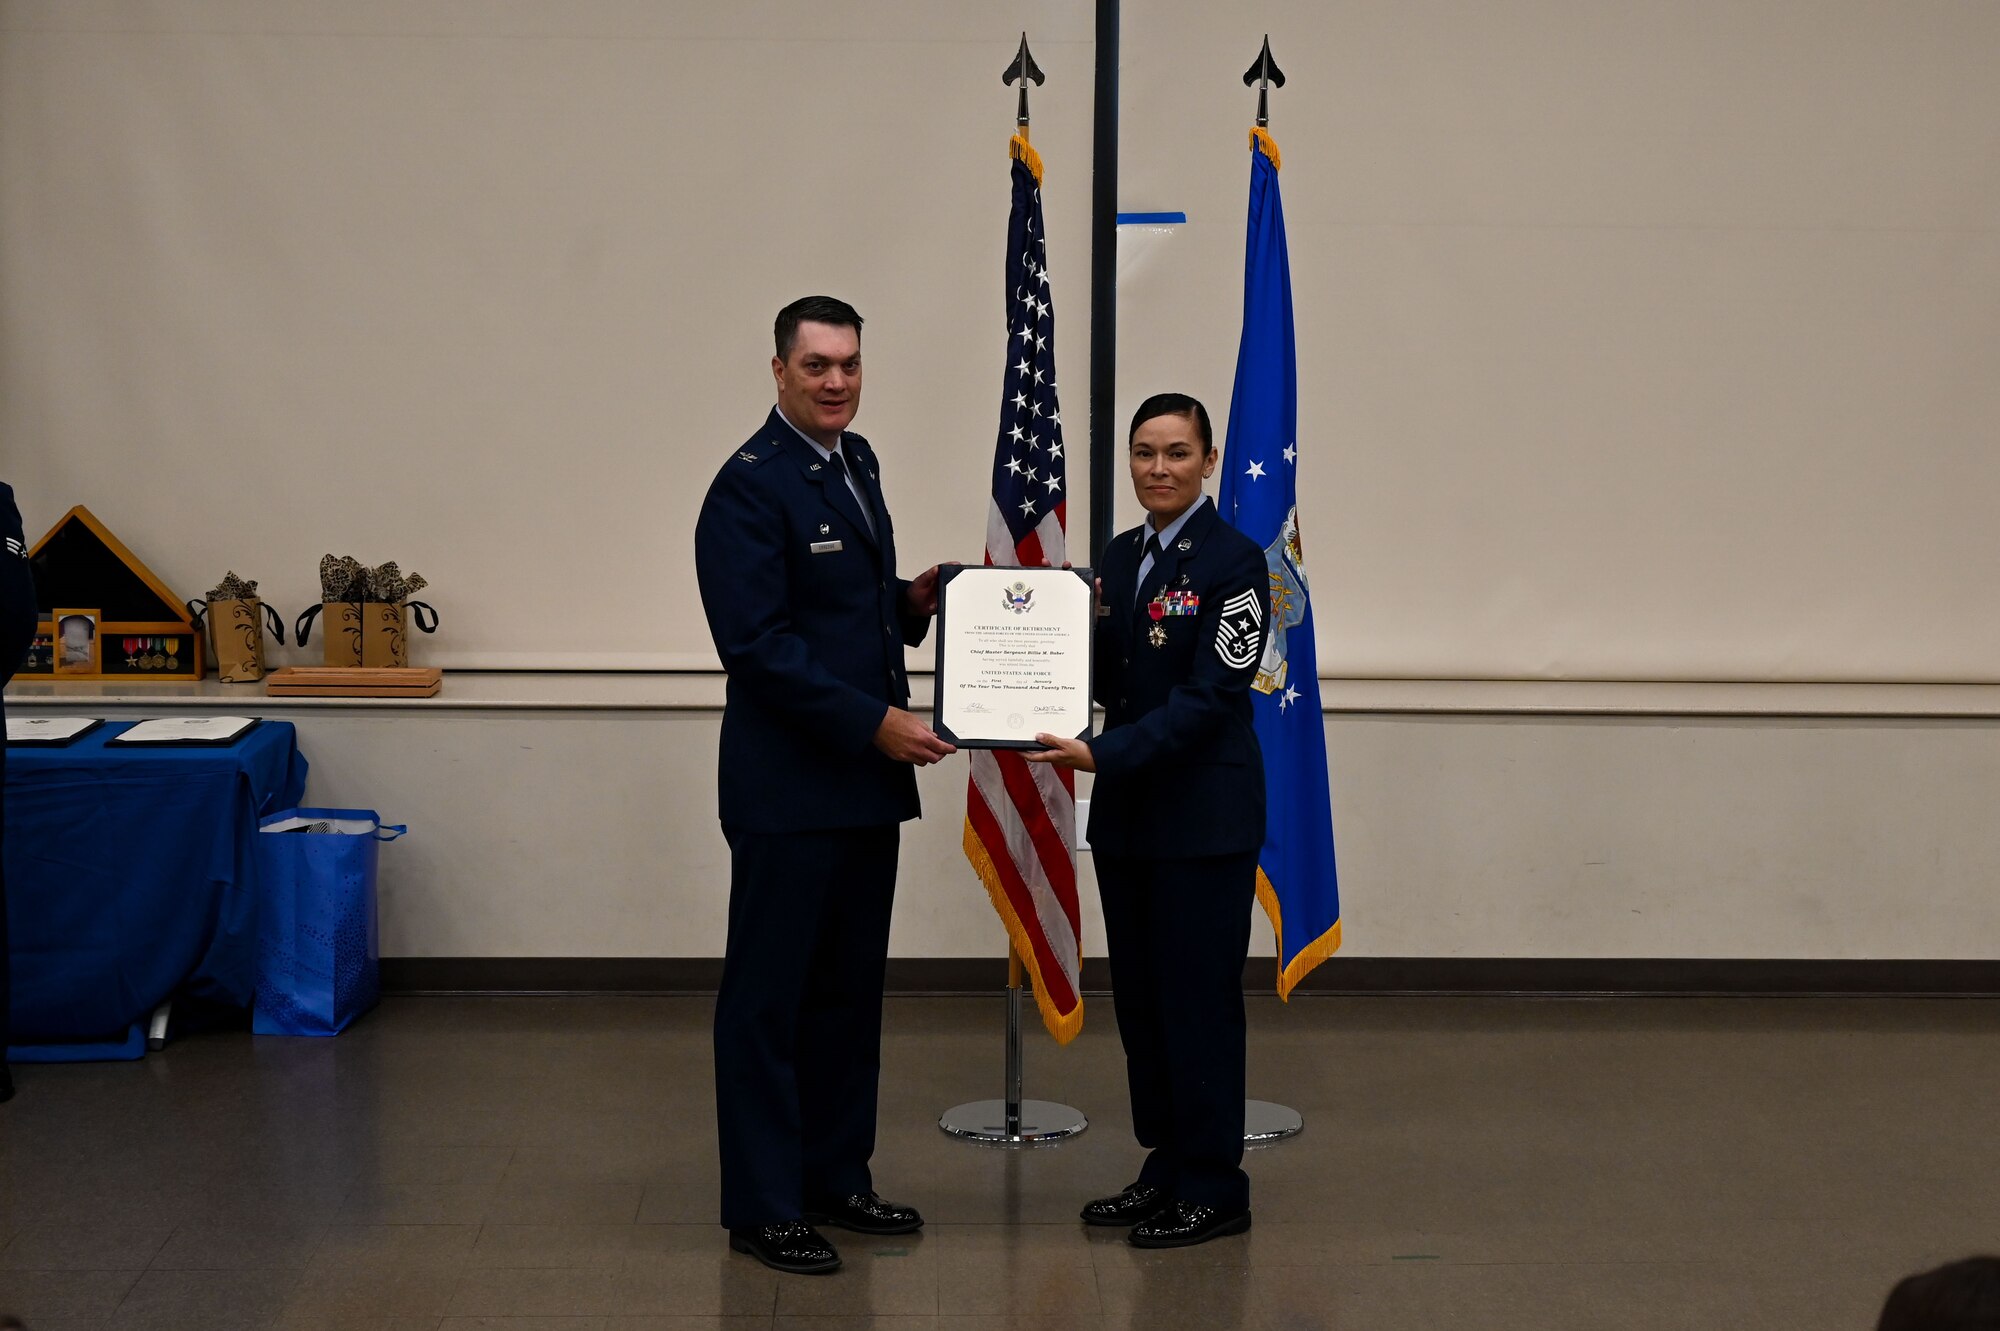 Col. Richard Erredge, 960th Cyberspace Wing commander, presents Chief Master Sgt. Billie Baber, 960th CW command chief, a certificate of retirement, Nov. 4, 2022, at Joint Base San Antonio-Lackland, Texas. Baber retired after dedicating 26 years to military service. (U.S. Air Force photo by Staff Sgt. Adriana Barrientos)